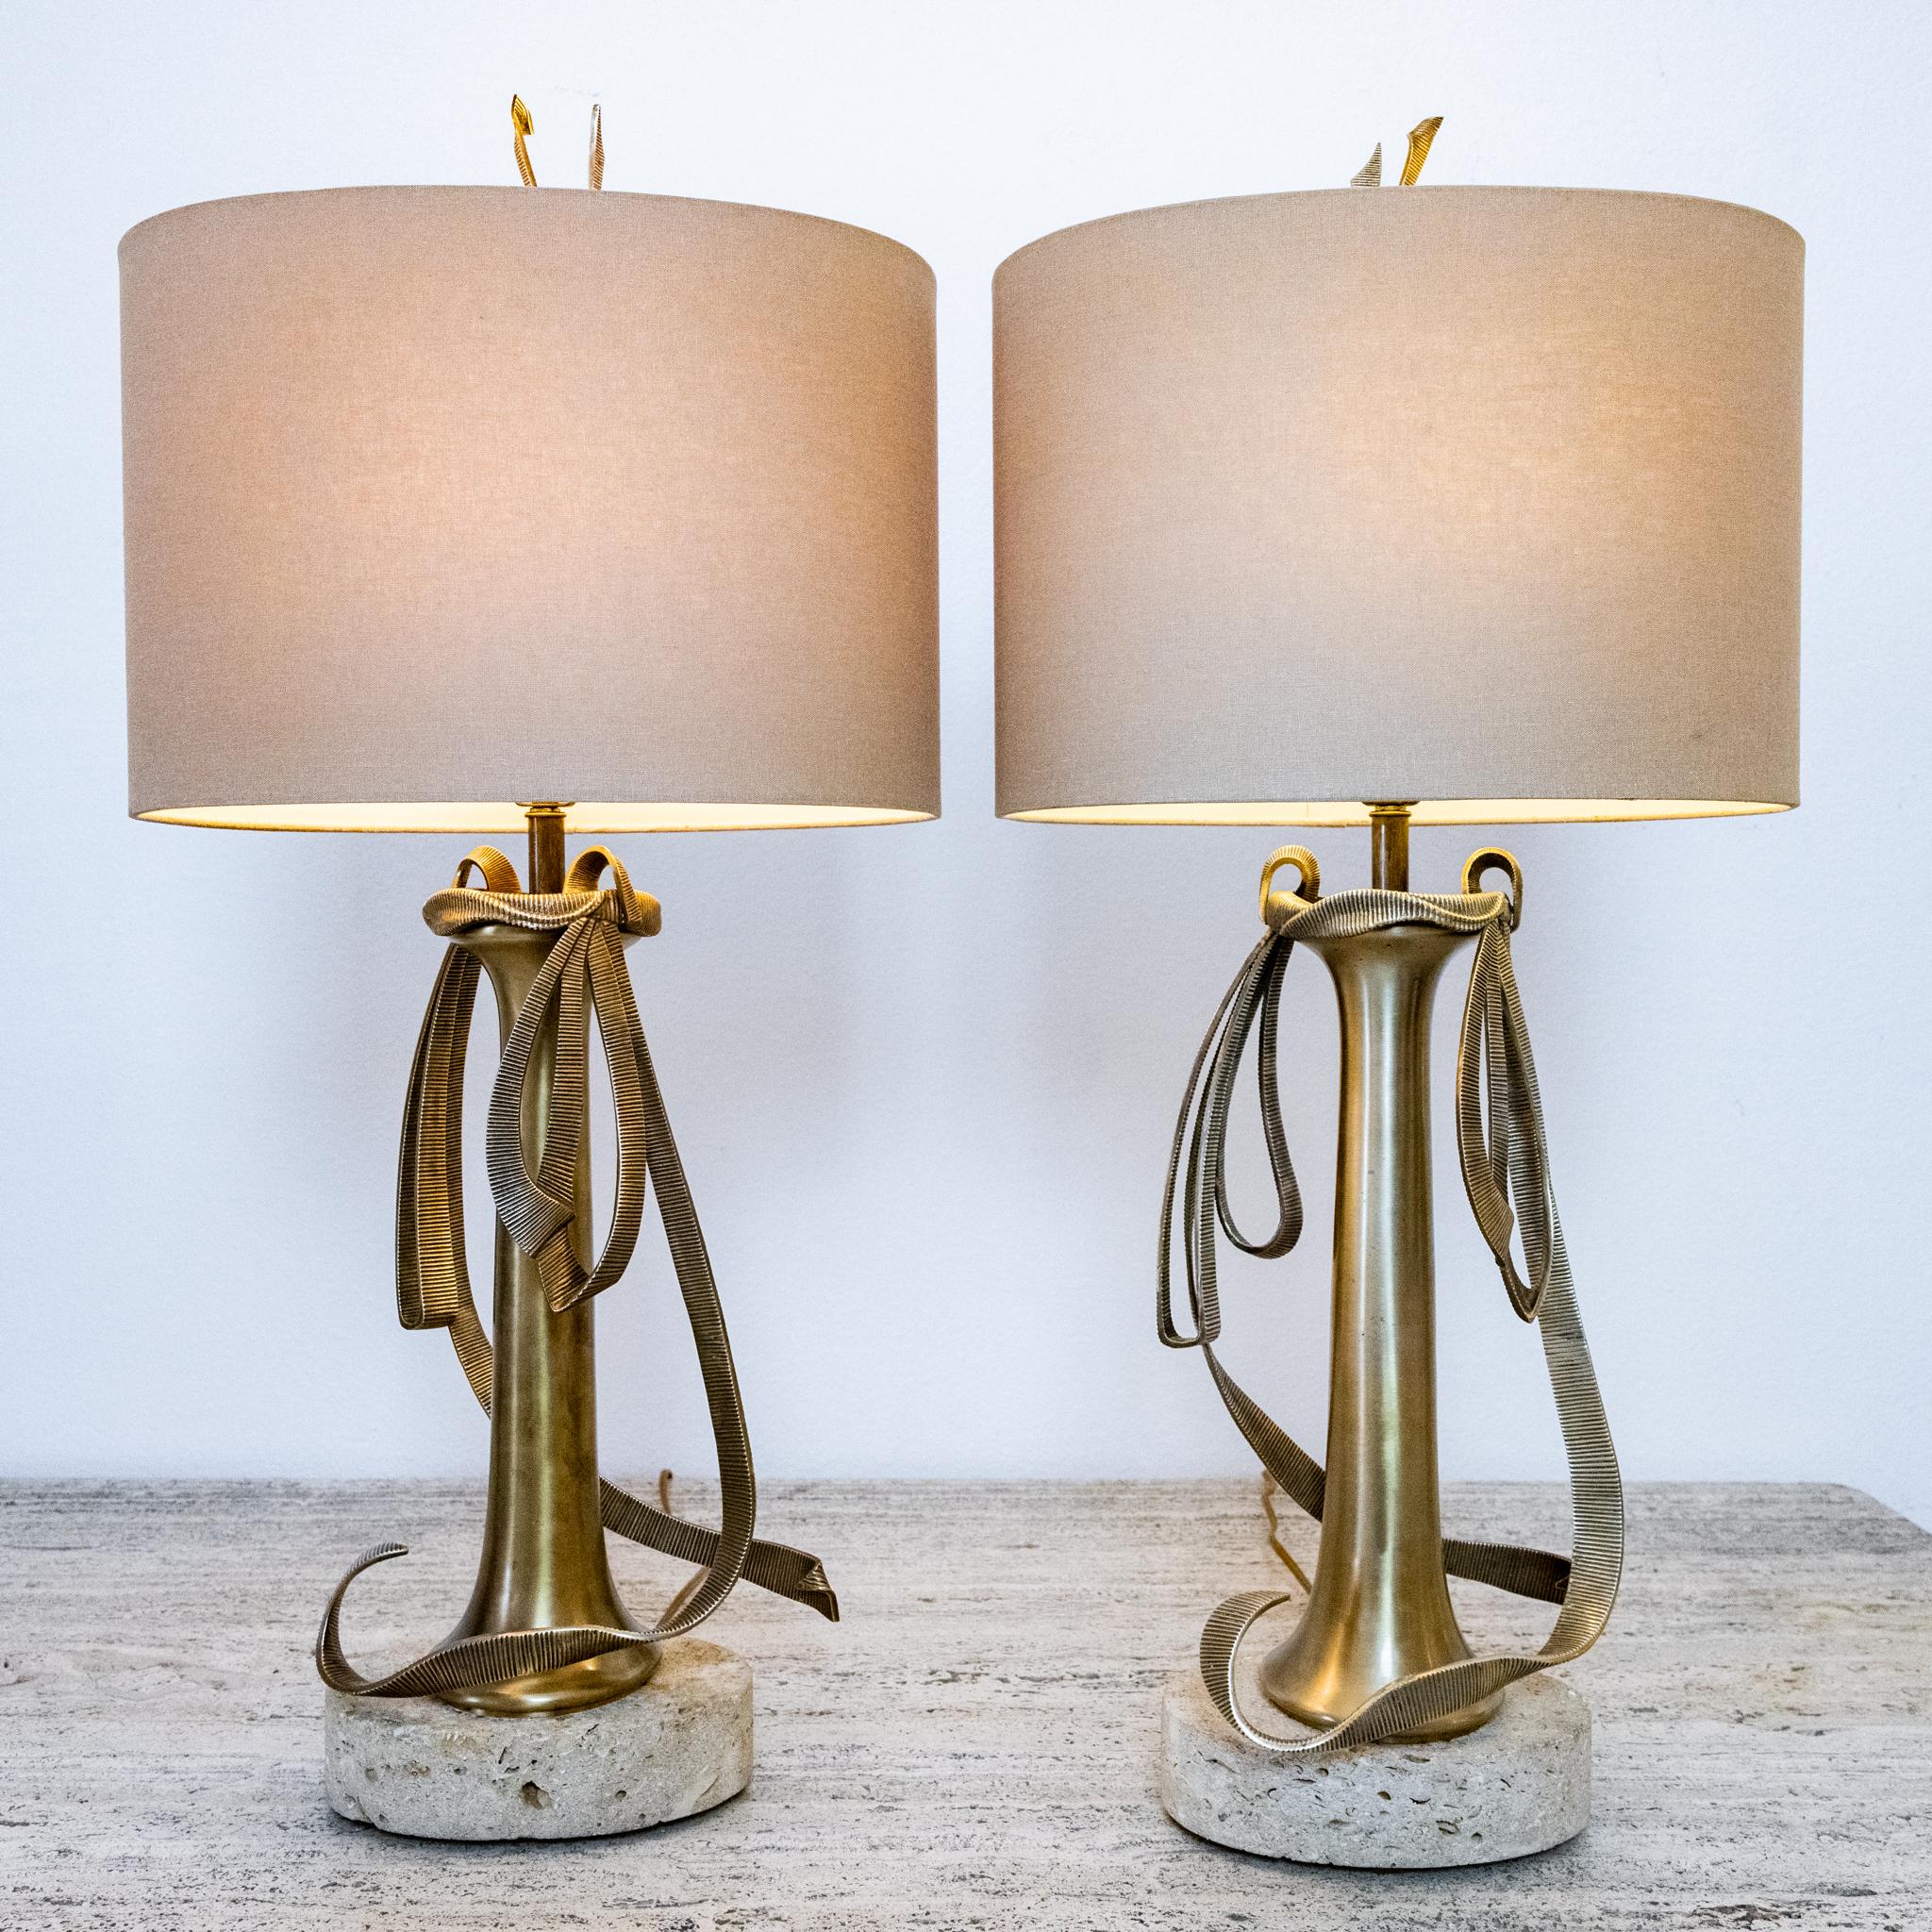 This pair of Chapman lamps, dated 1999, feature a beautiful brass stem and brass ribbon detail. The travertine base adds to the interest of these lamps by bringing in an additional material. Perfect for bedside or living room lamps, these